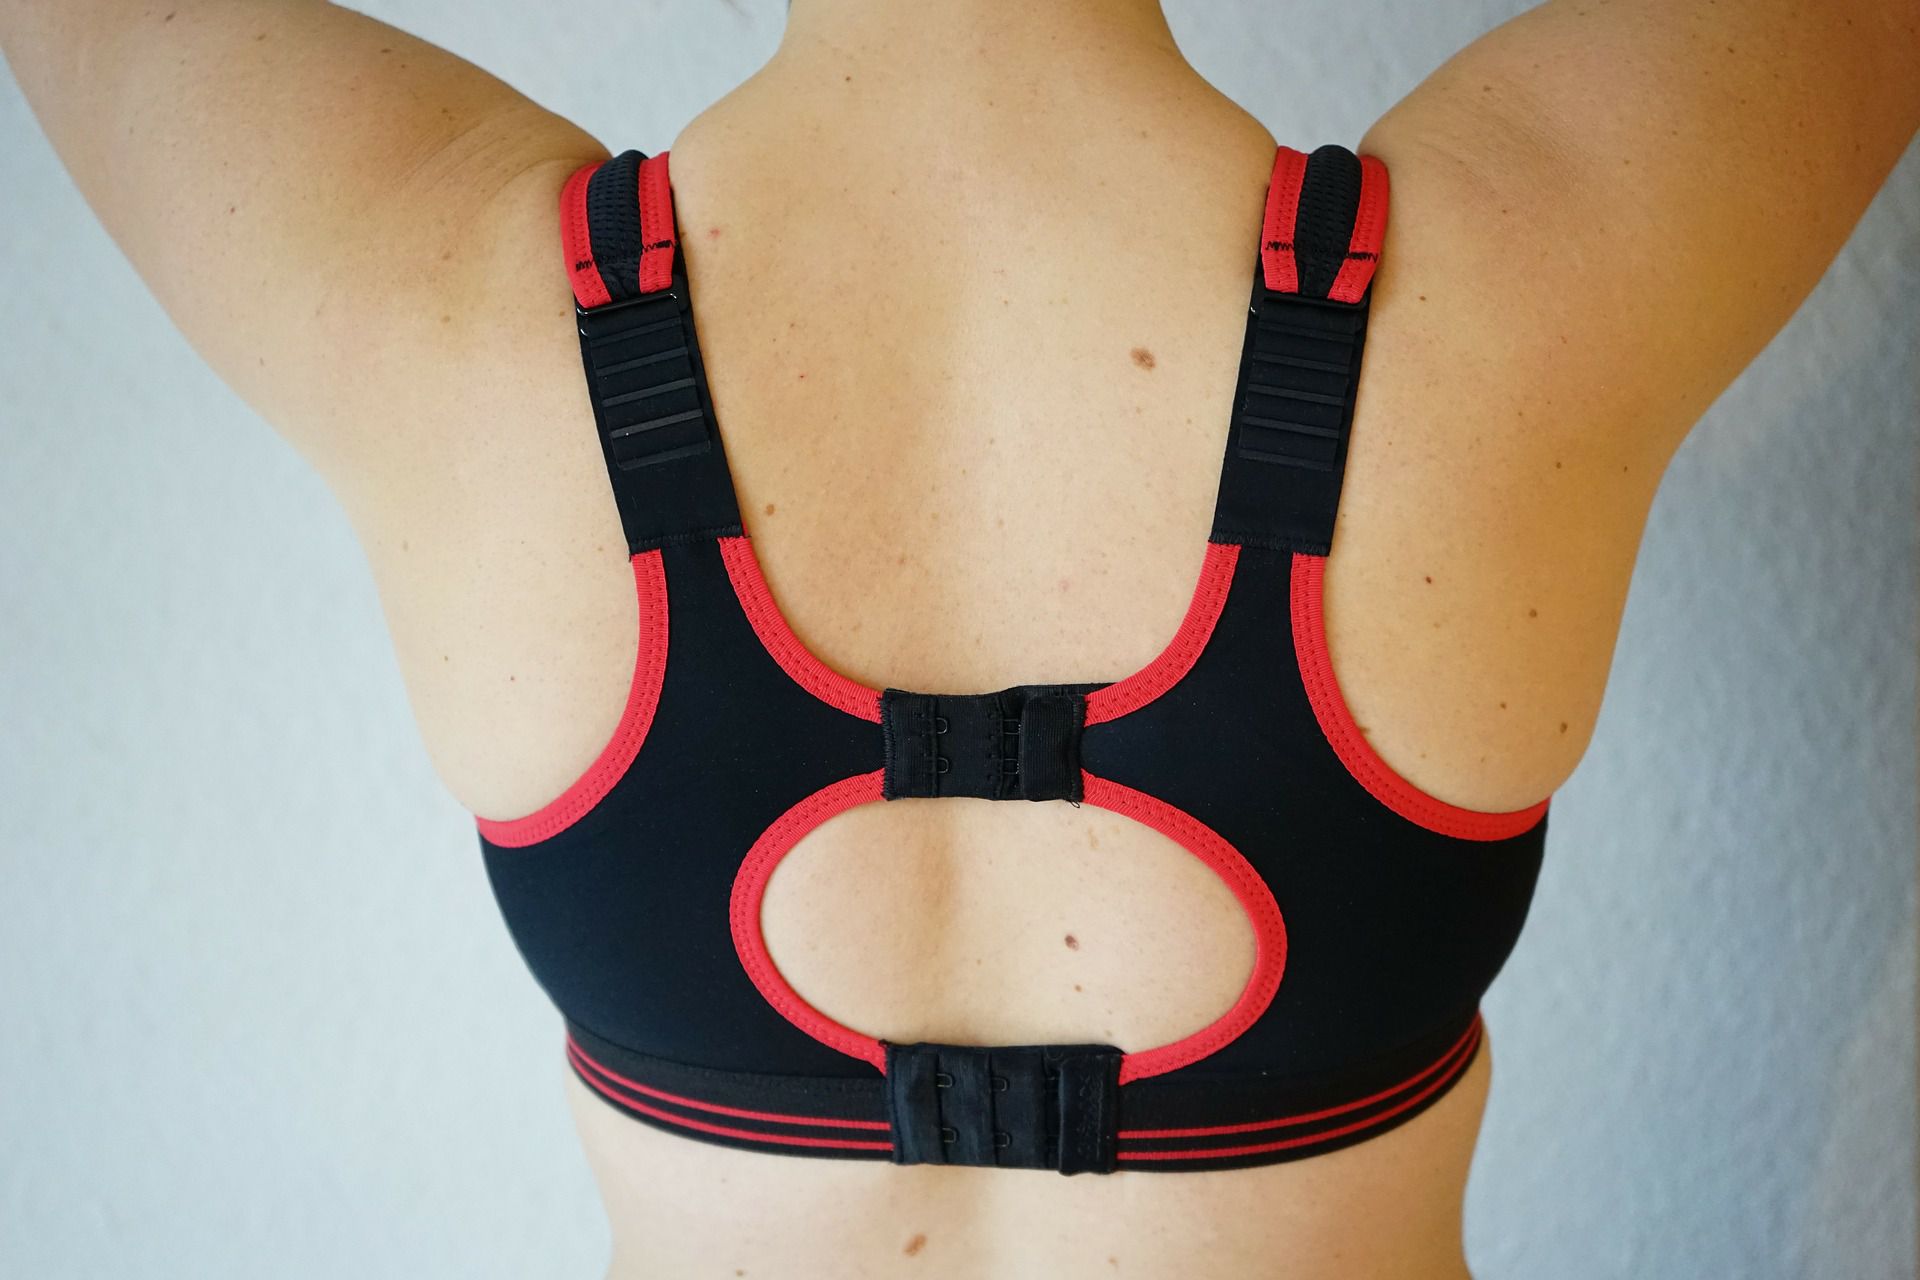 Inventor of sports bra talks about product origin: 'It was not lingerie